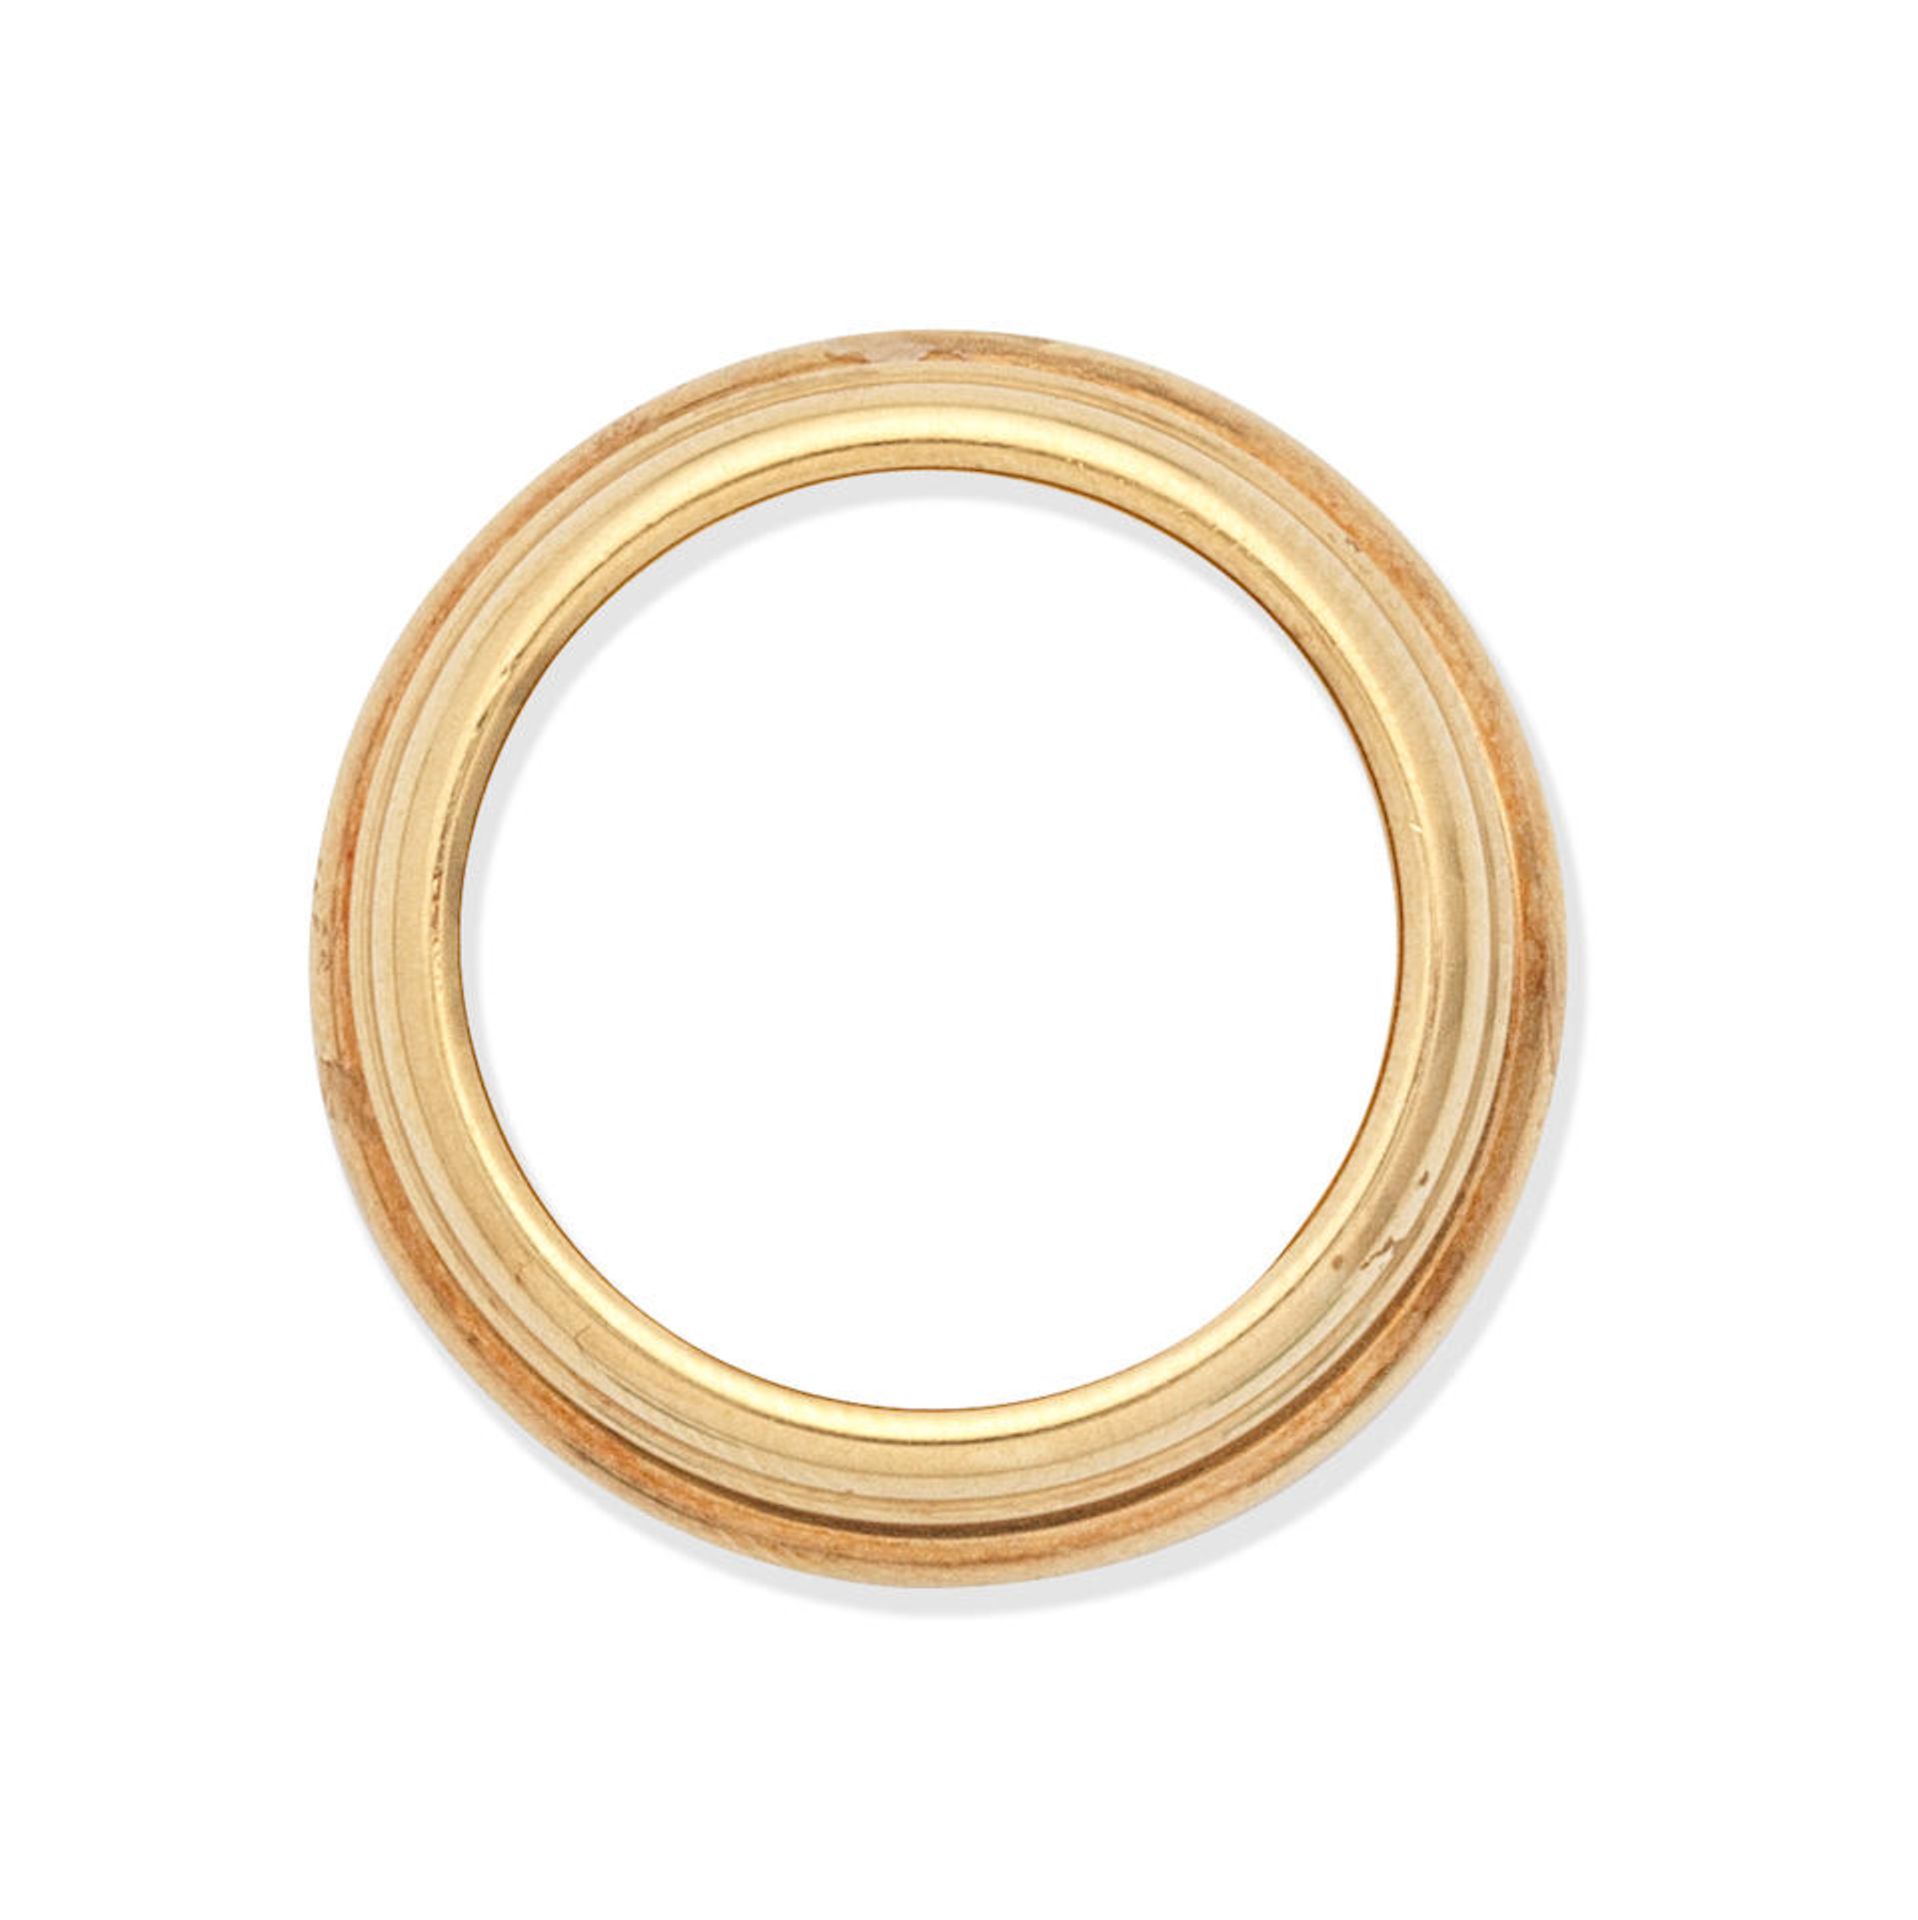 PIAGET: GOLD 'POSSESSION' RING - Image 2 of 2